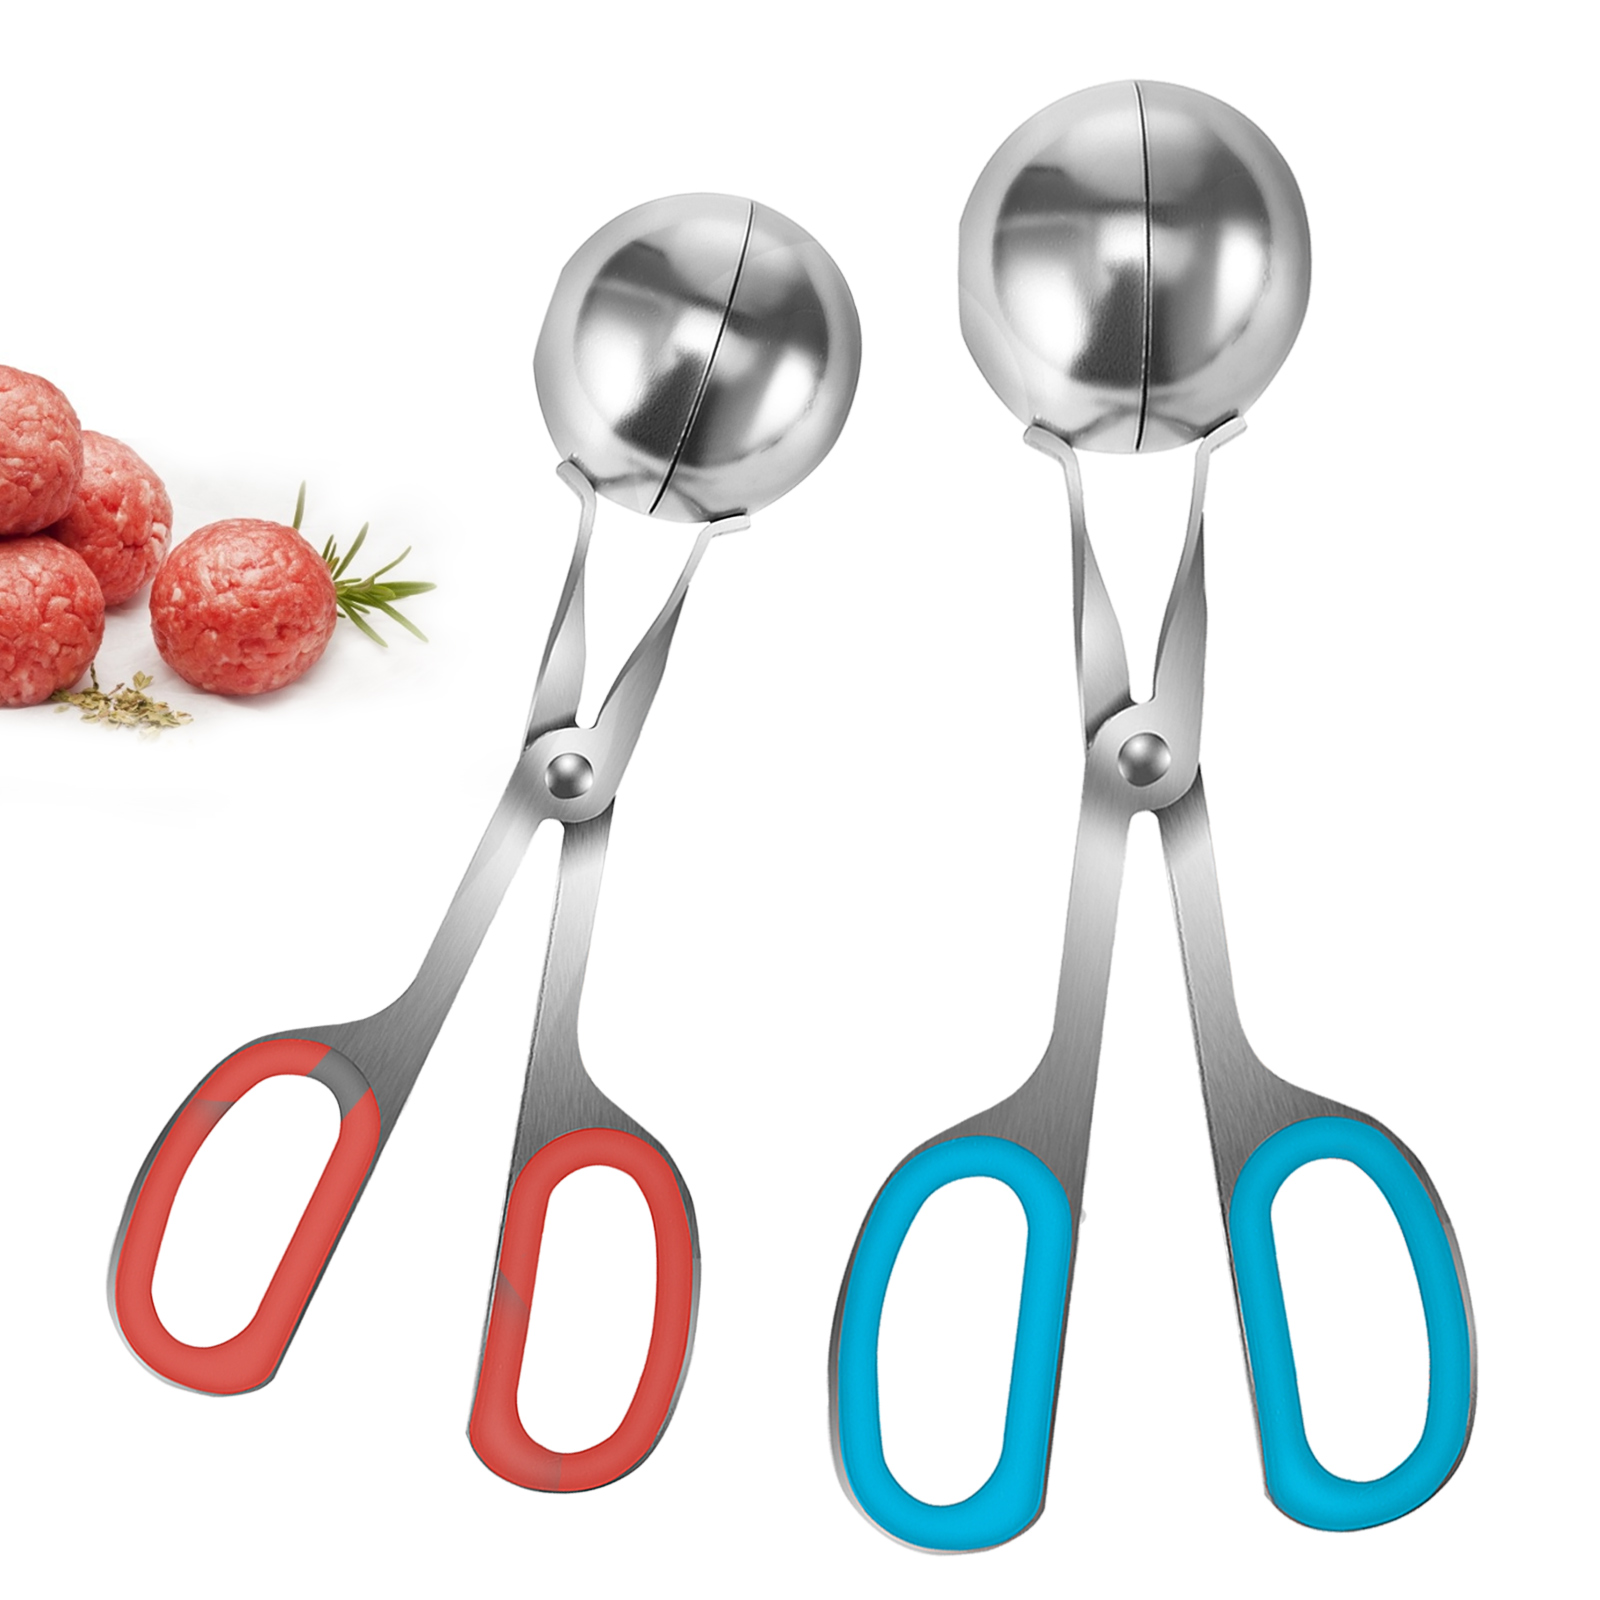 VEVOR Meatball Maker Tongs, 2 PCS per Pack, 1.5 & 2.2 Meat Baller Scoops,  Stainless Steel Cake Pop Scoop Ball Maker with Red & Blue Rubber Handles,  Meatball Tongs for Meat Fruits